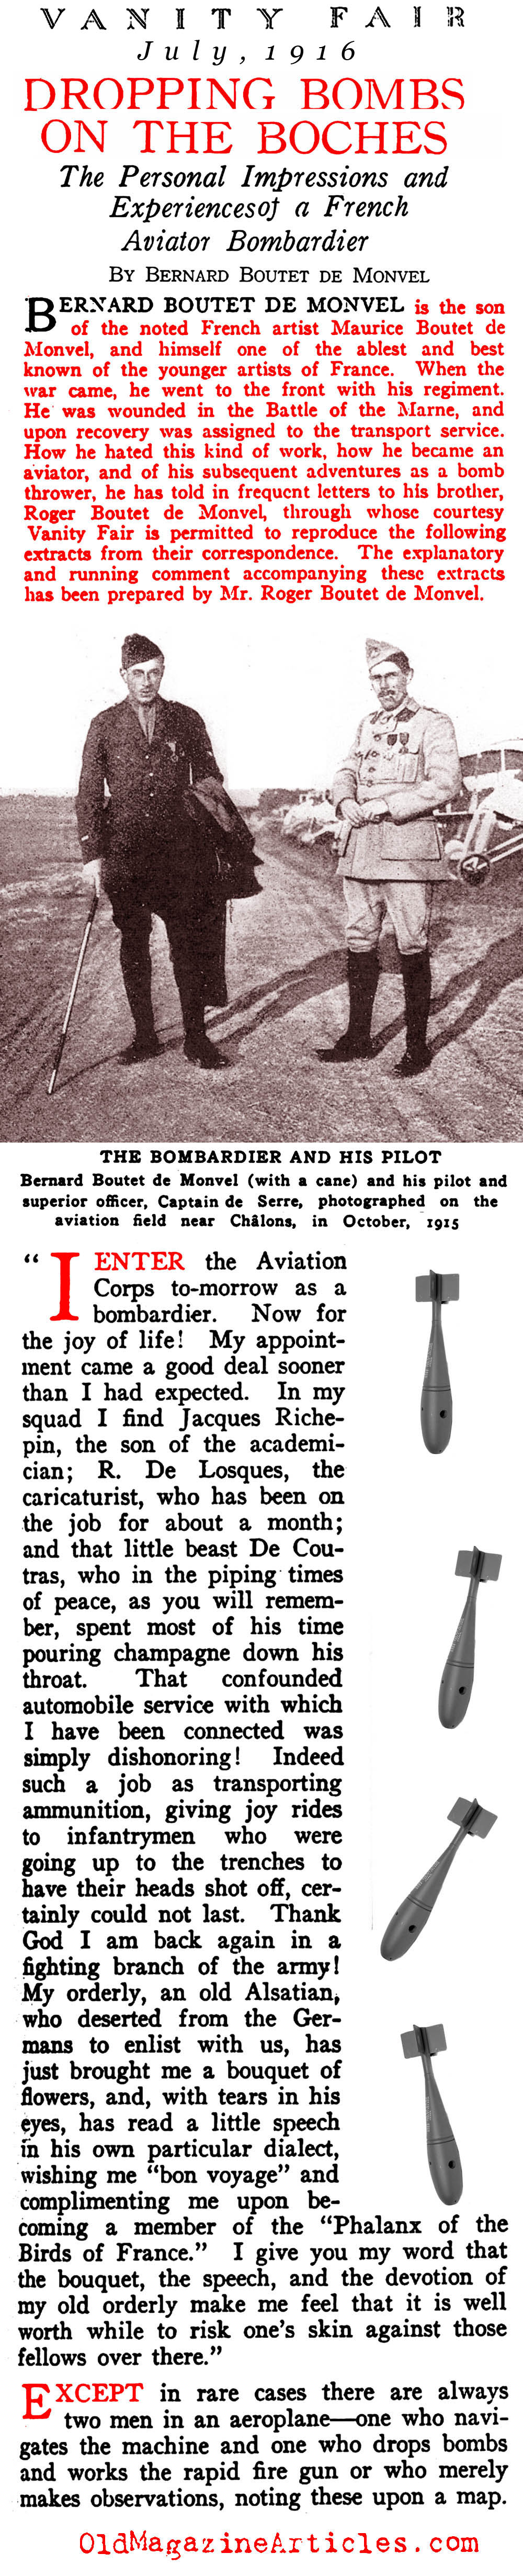 A Letter from a Bombardier in the French Air Corps   (Vanity Fair, 1916)